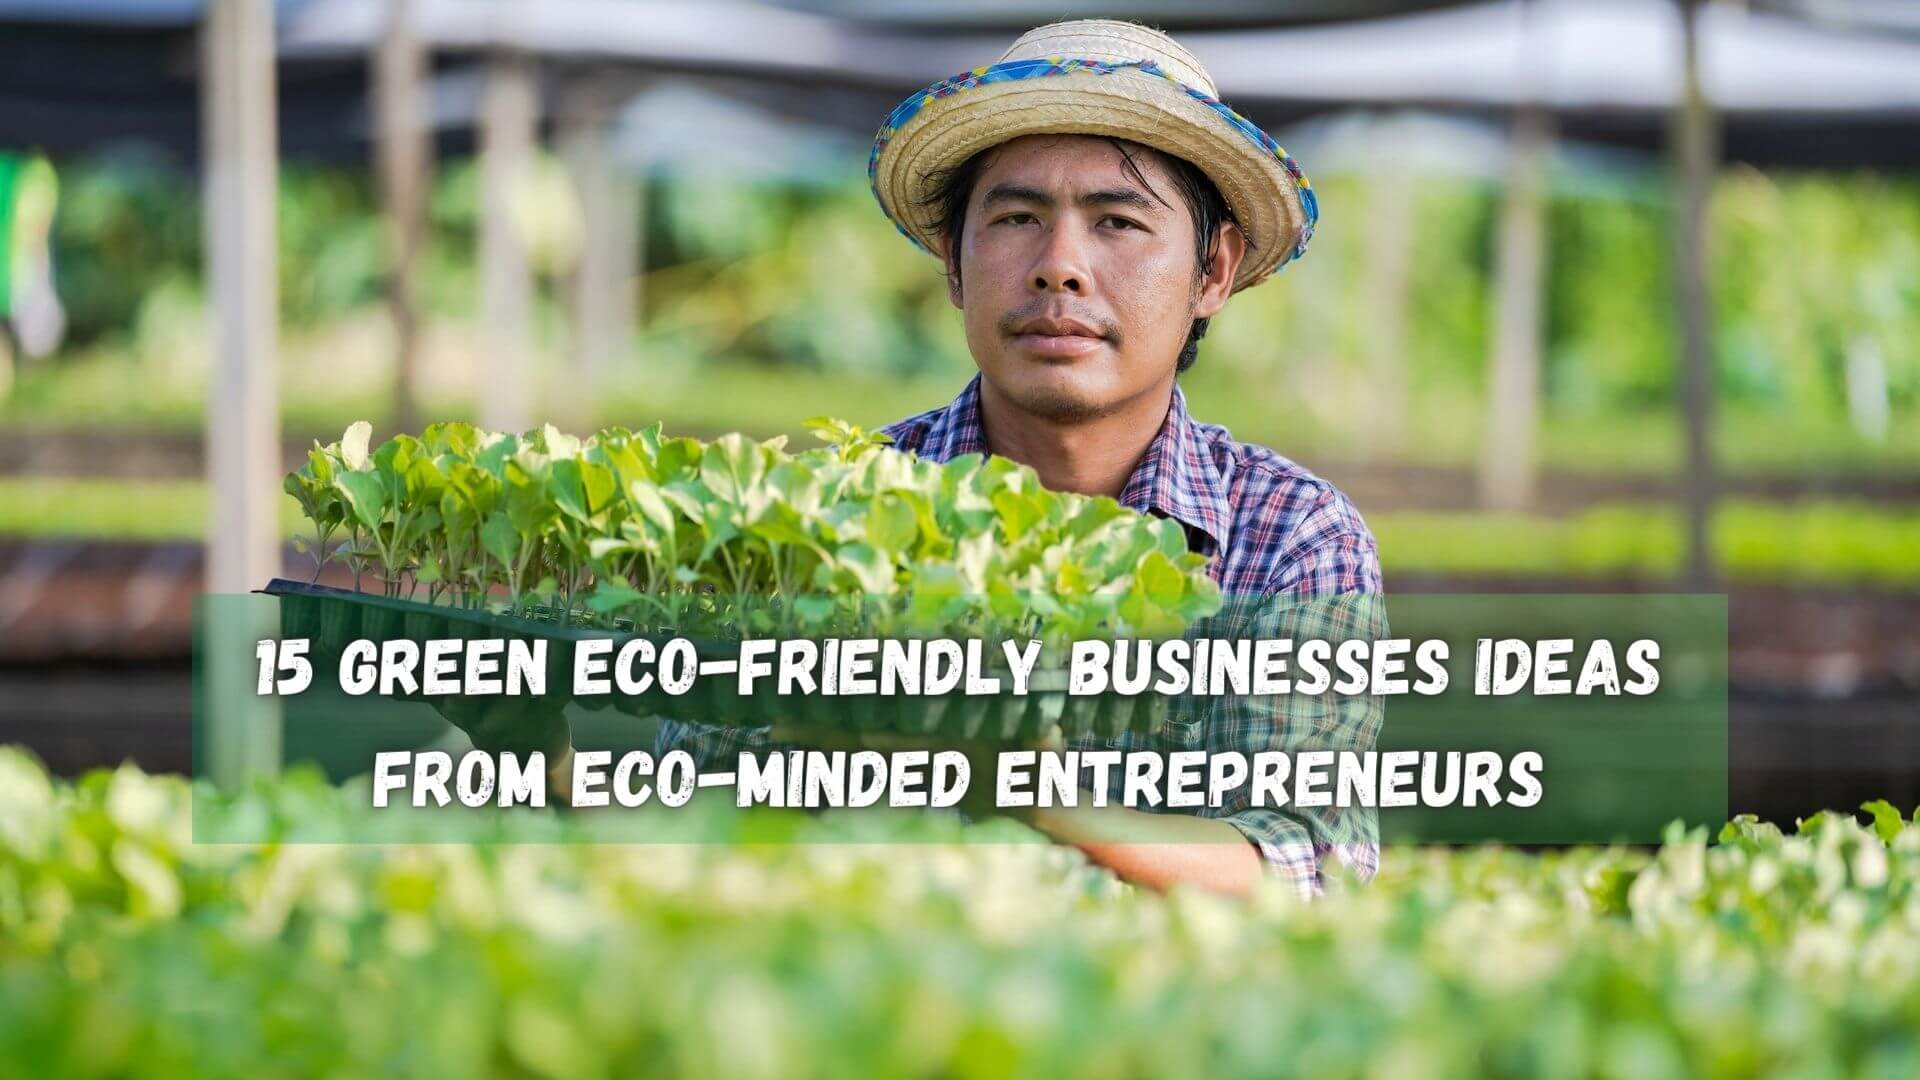 Eco-friendly businesses are companies that operate with the primary goal of minimizing their negative impact on the environment. Learn more!